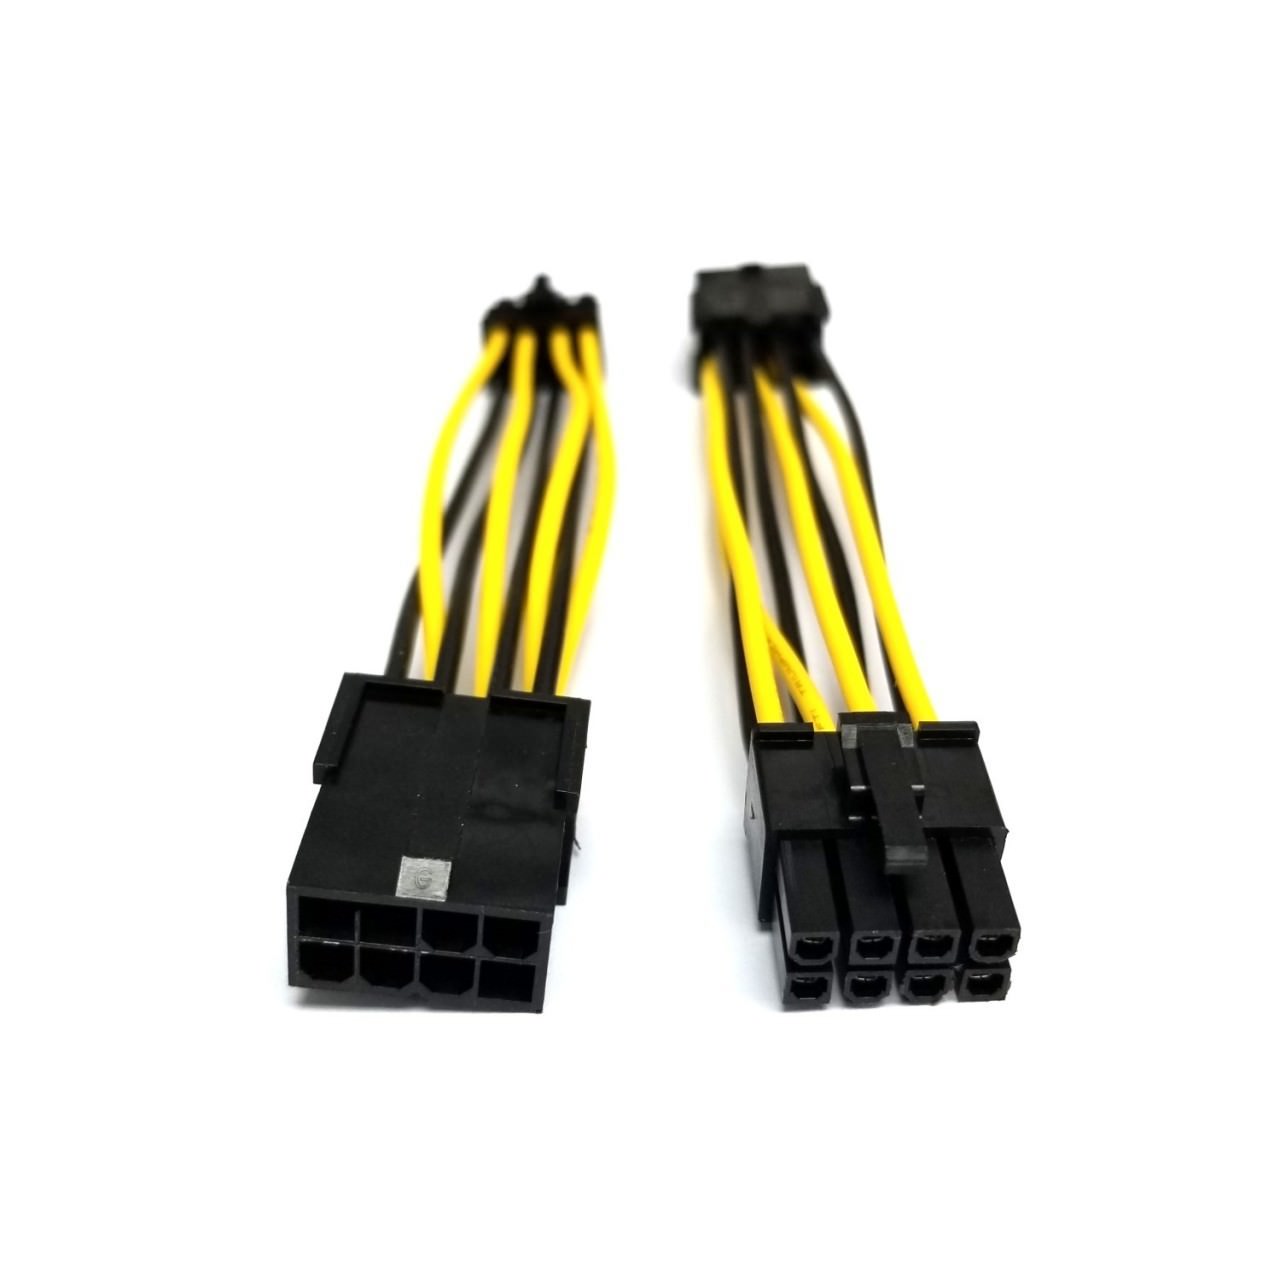 PCIE 8 Pin to ATX CPU EPS 8 Pin Adapter Cable 10cm